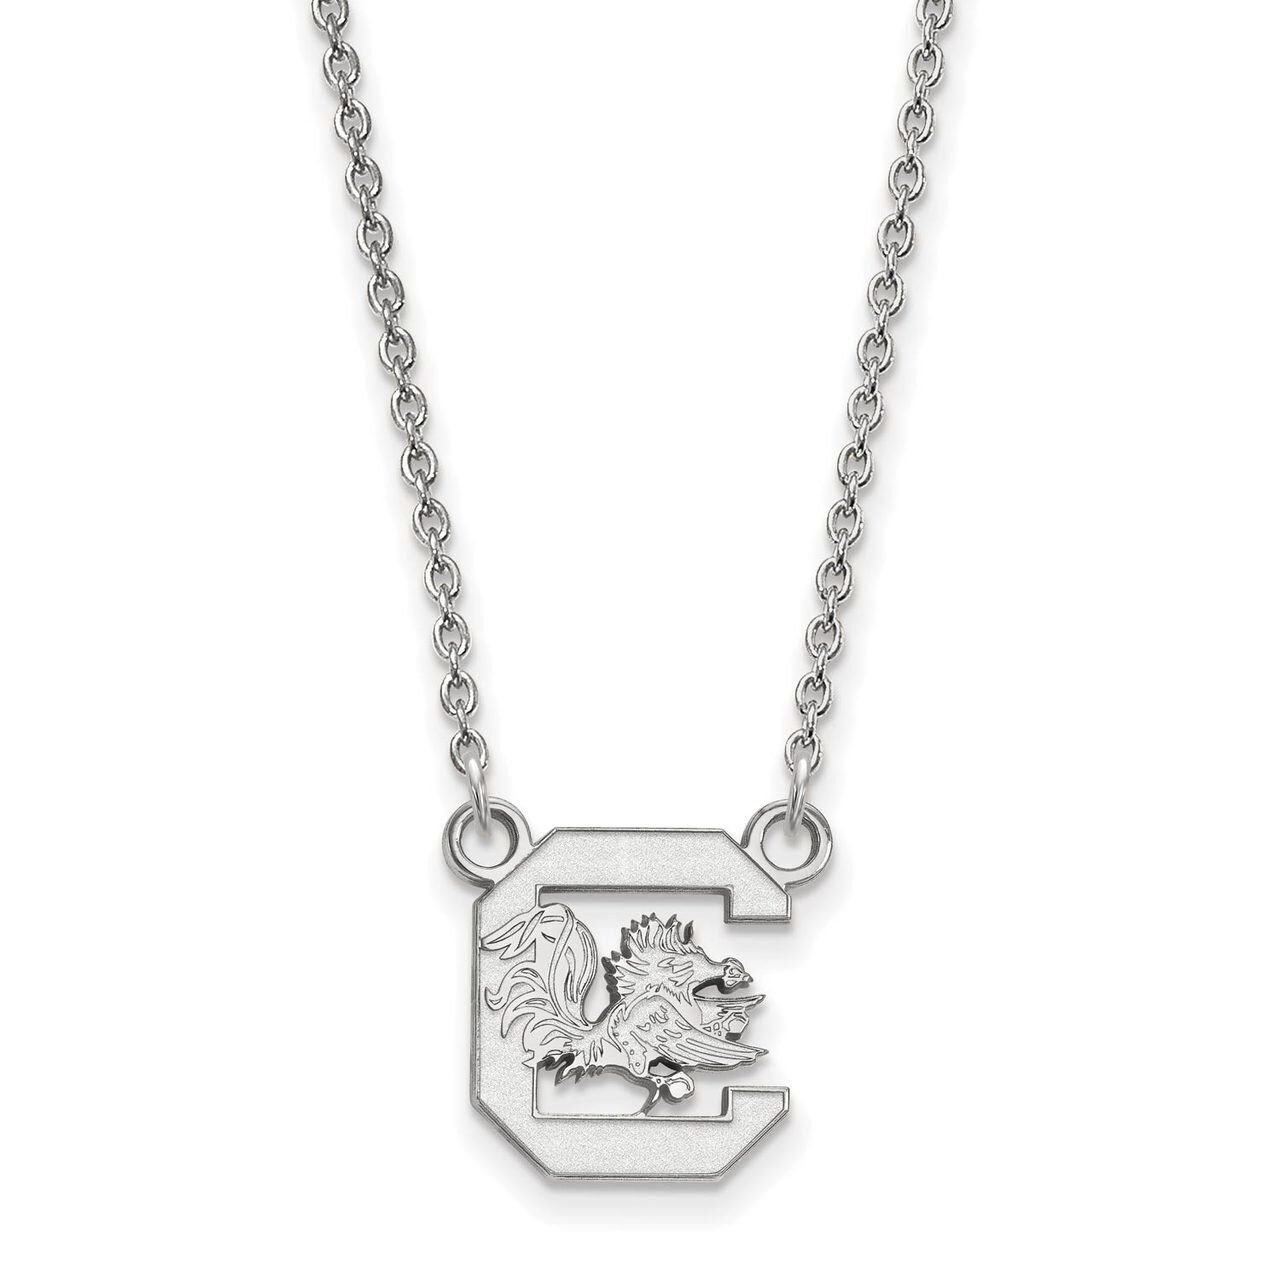 University of South Carolina Small Pendant with Chain Necklace 14k White Gold 4W015USO-18